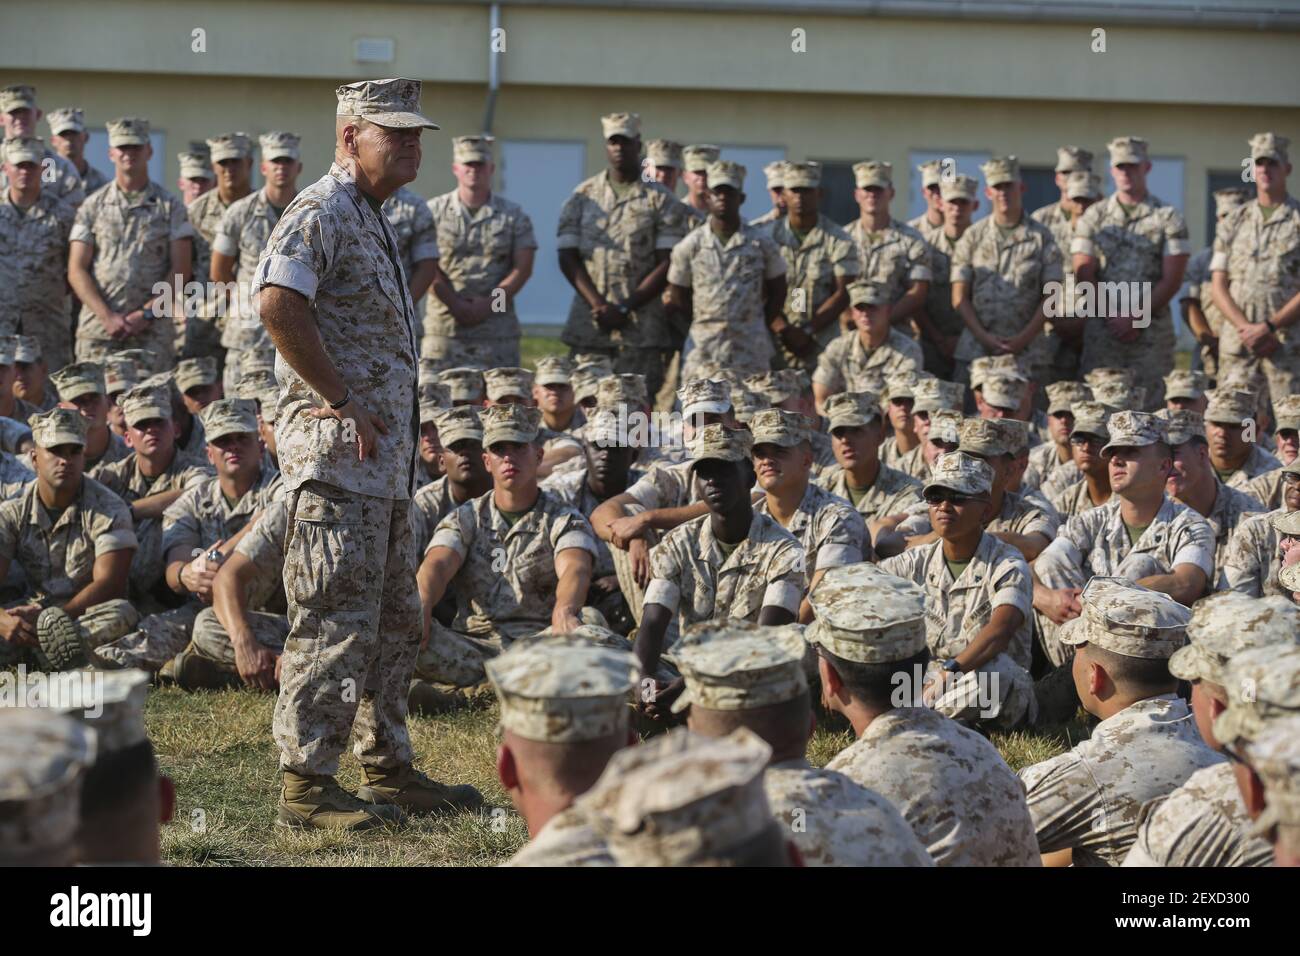 Lieutenant Gen. Robert B. Neller, commander of U.S. Marine Forces Command and U.S. Marine Forces Europe and confirmed 37th Commandant of the Marine Corps, speaks with Marines and sailors with the Black Sea Rotational Force during his visit at Mihail Kogalniceanu Air Base, Romania, Aug. 16, 2015. Marines with 3rd Battalion, 8th Marine Regiment, 2nd Marine Division assumed responsibility for the current rotation of BSRF and will spend the next several months training with partner nations to forge stronger bonds and strengthen regional security. (Photo by LCpl. Melanye E. Martinez/U.S. Marine Cor Stock Photo